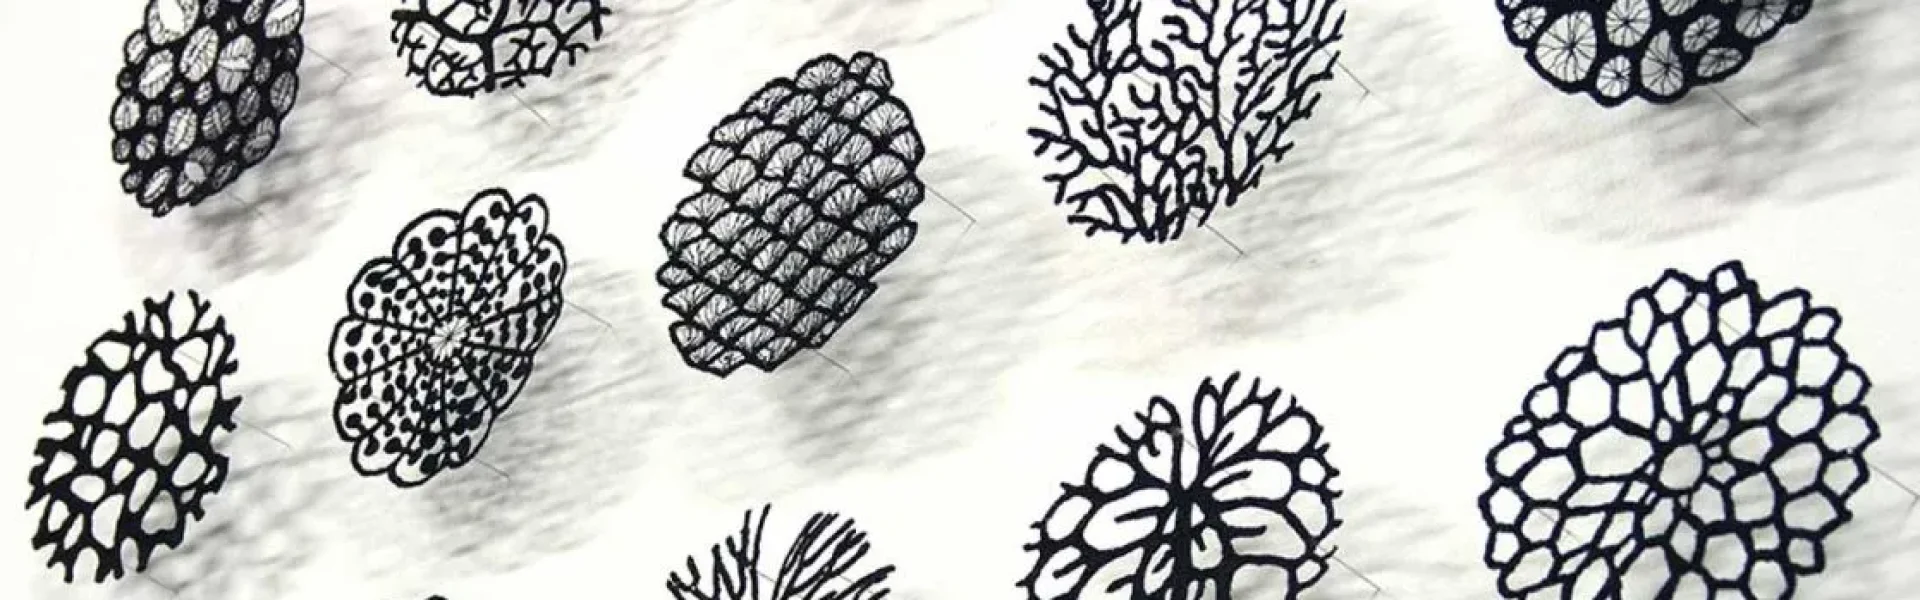 Meredith Woolnough interview with the School of Stitched Textiles